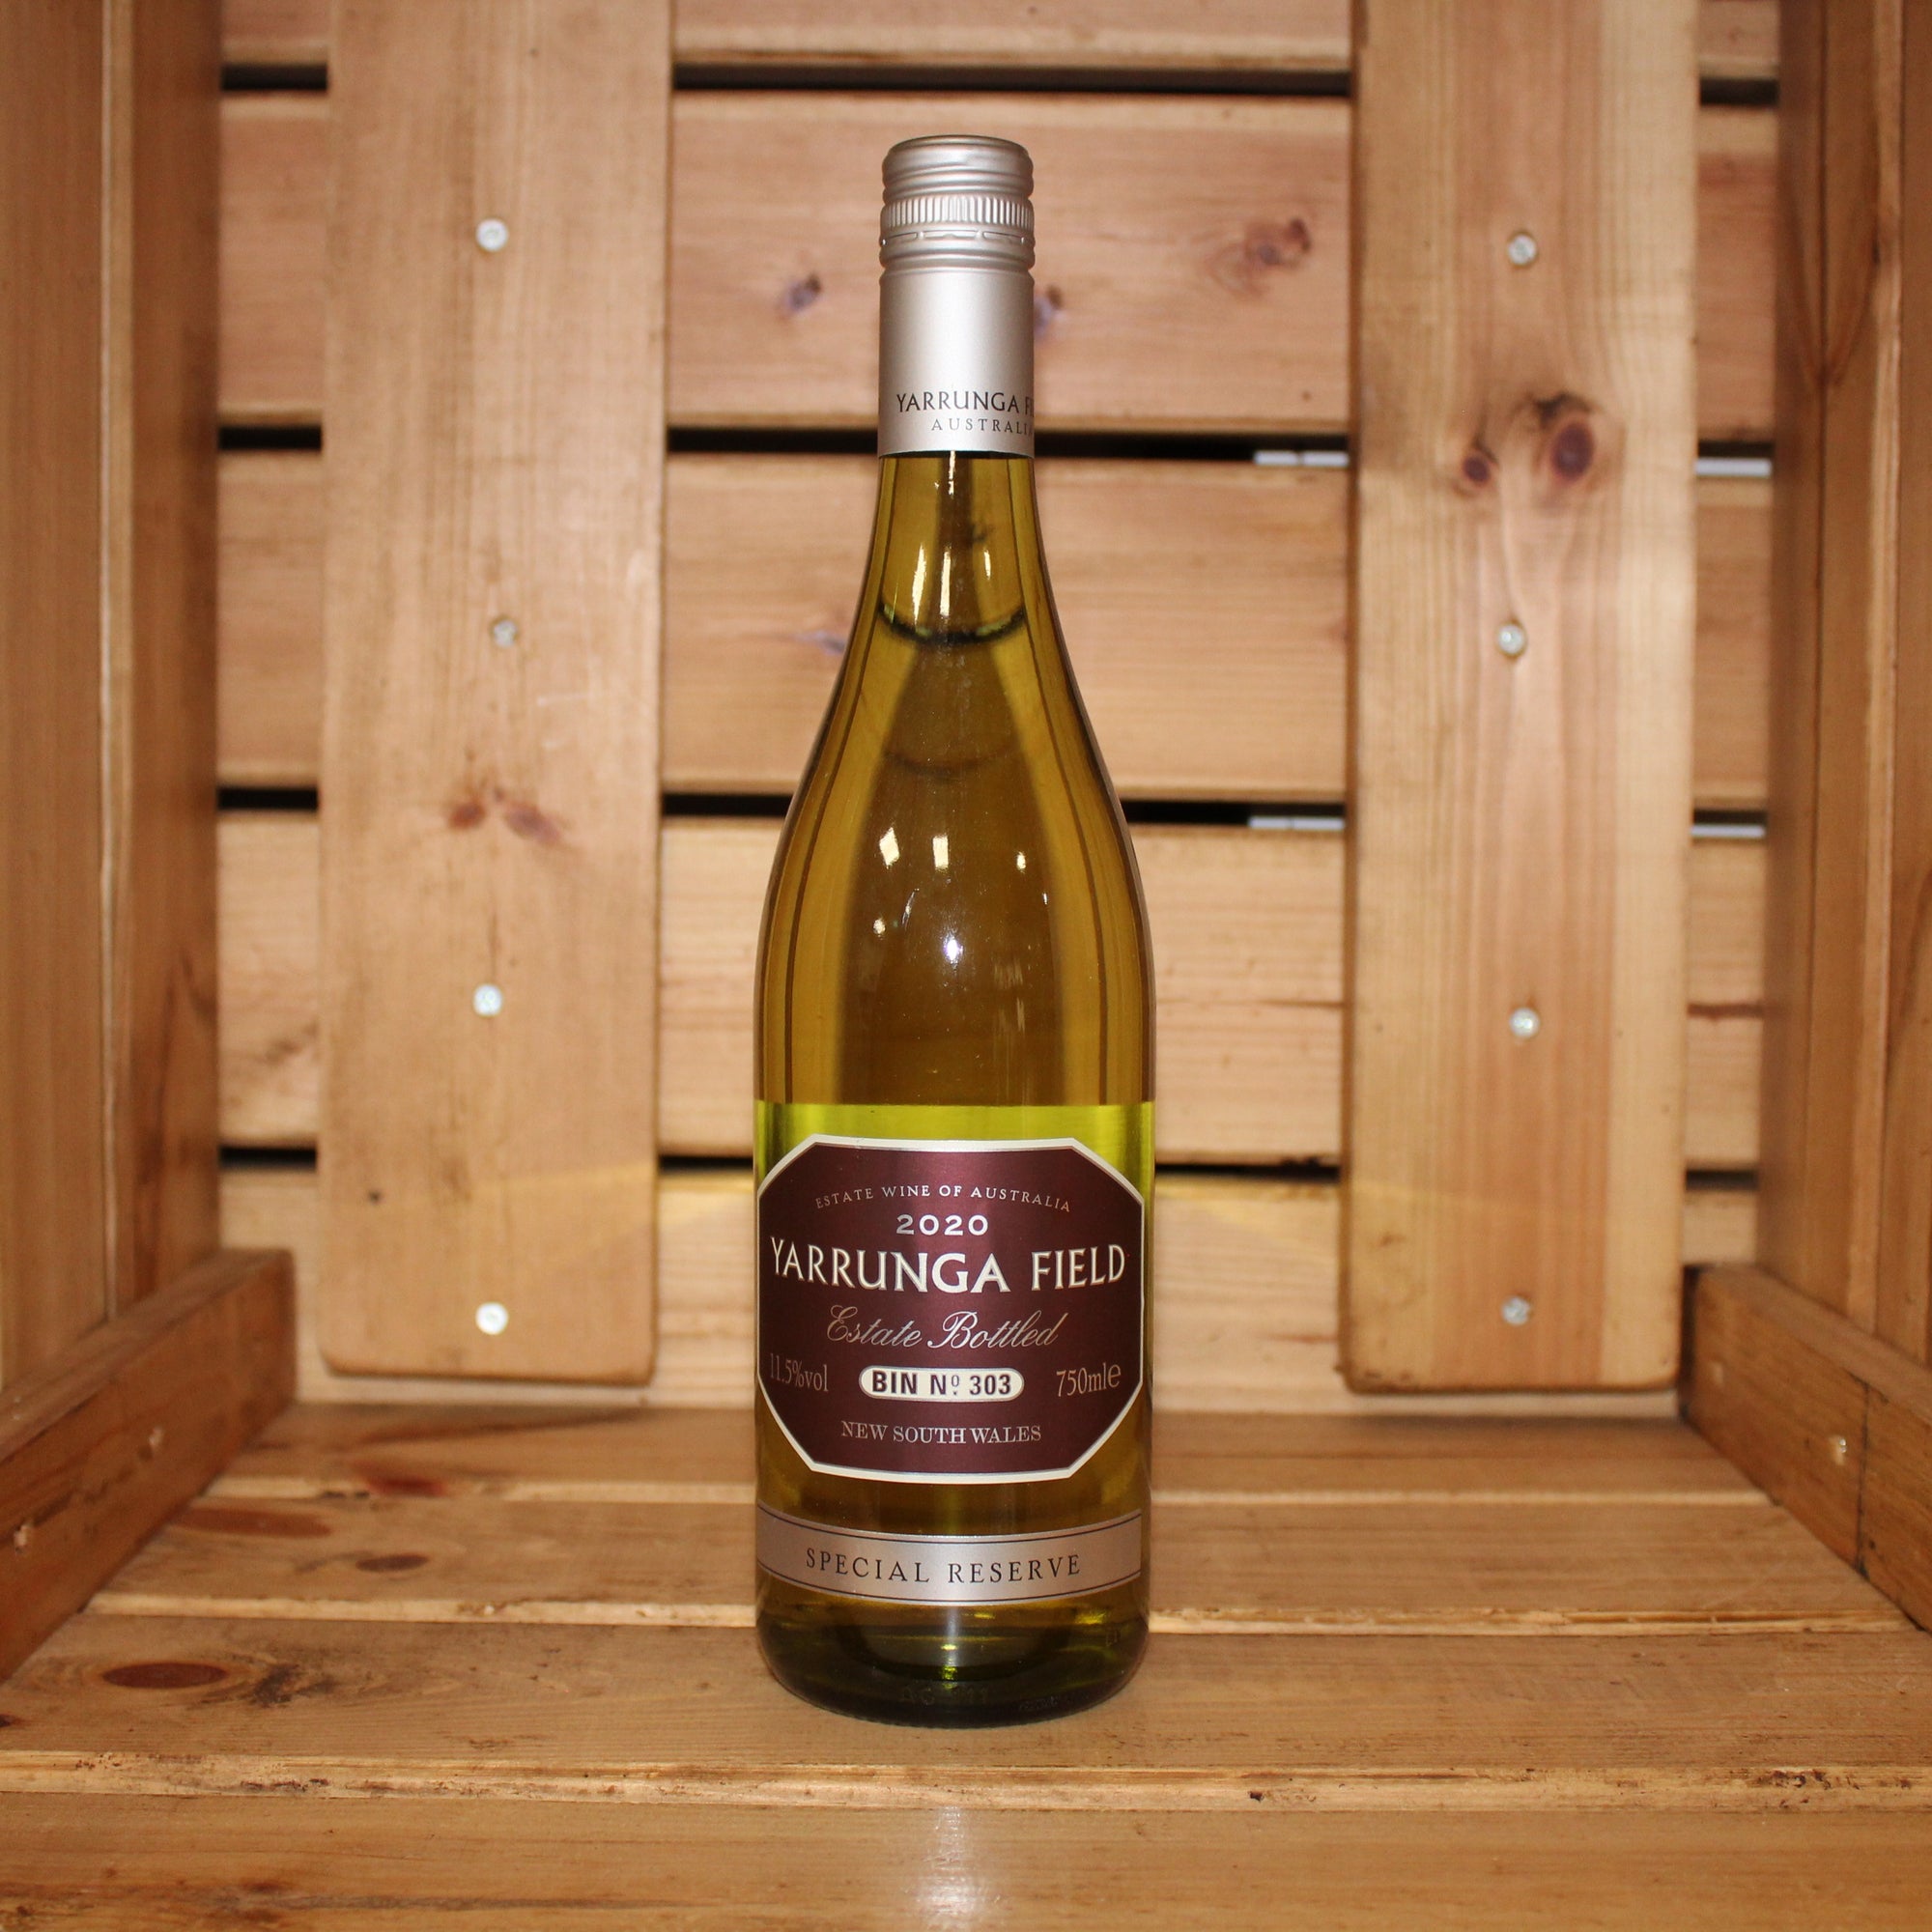 The Yarrunga Field Special Reserve White Wine 75cl